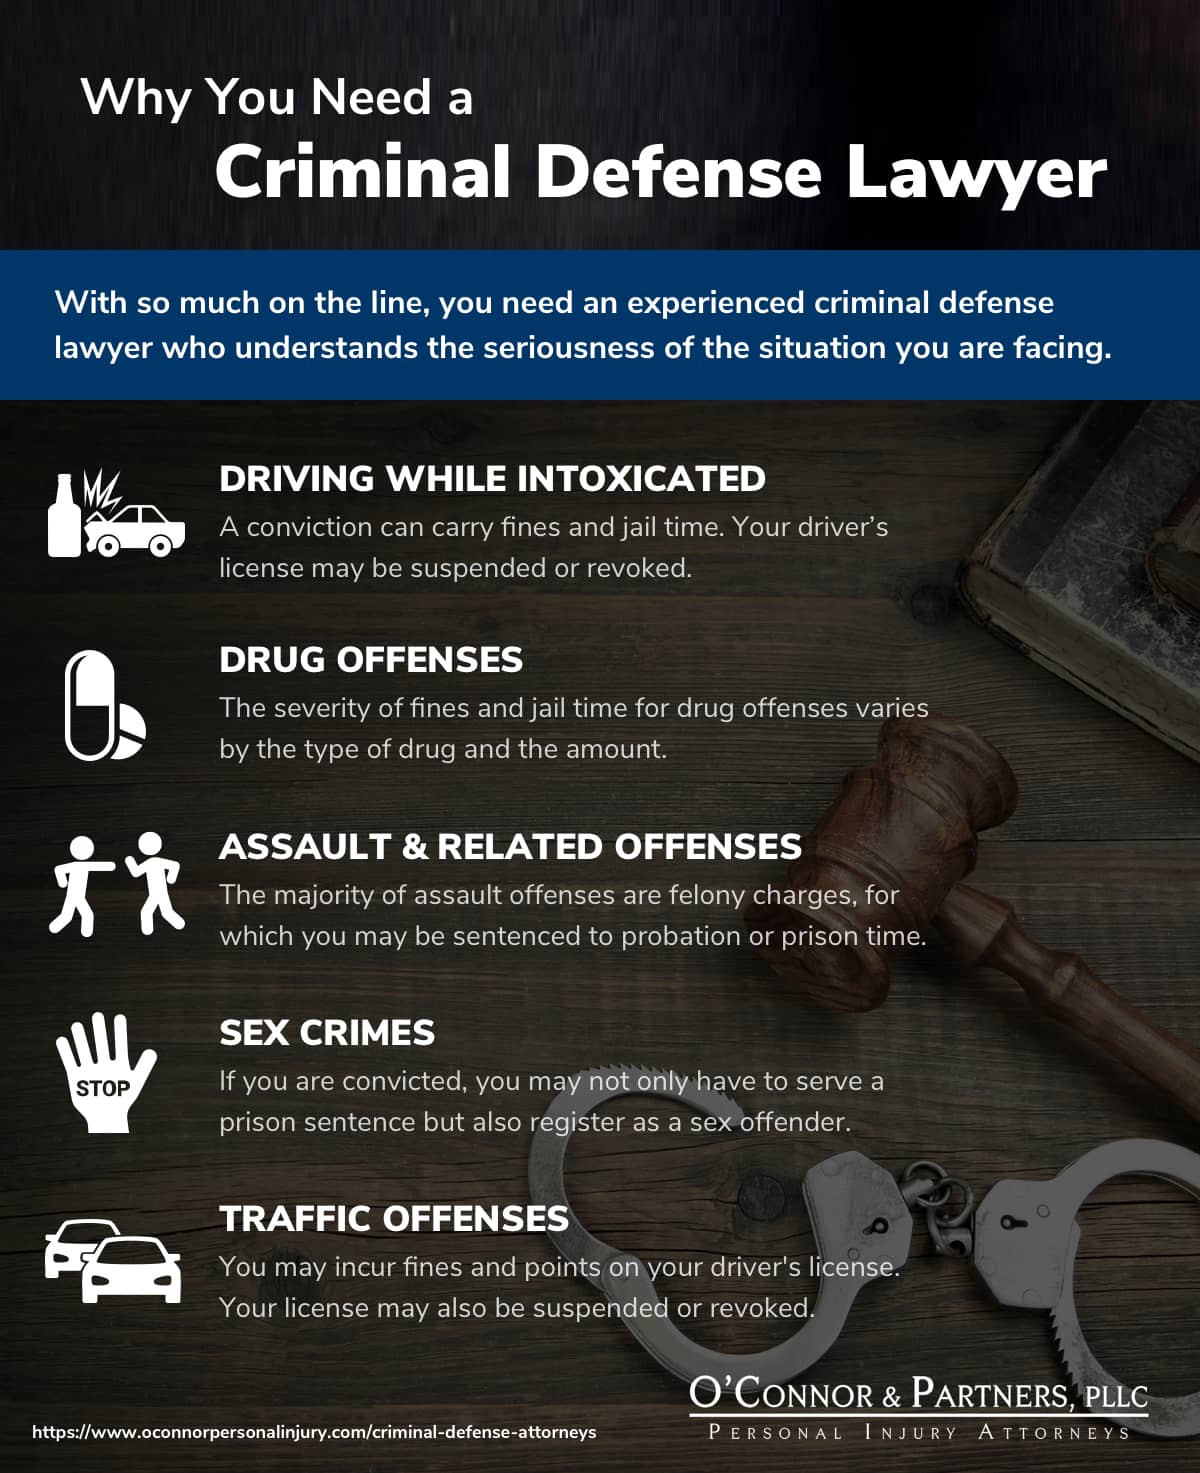 Why You Need a Criminal Defense Lawyer